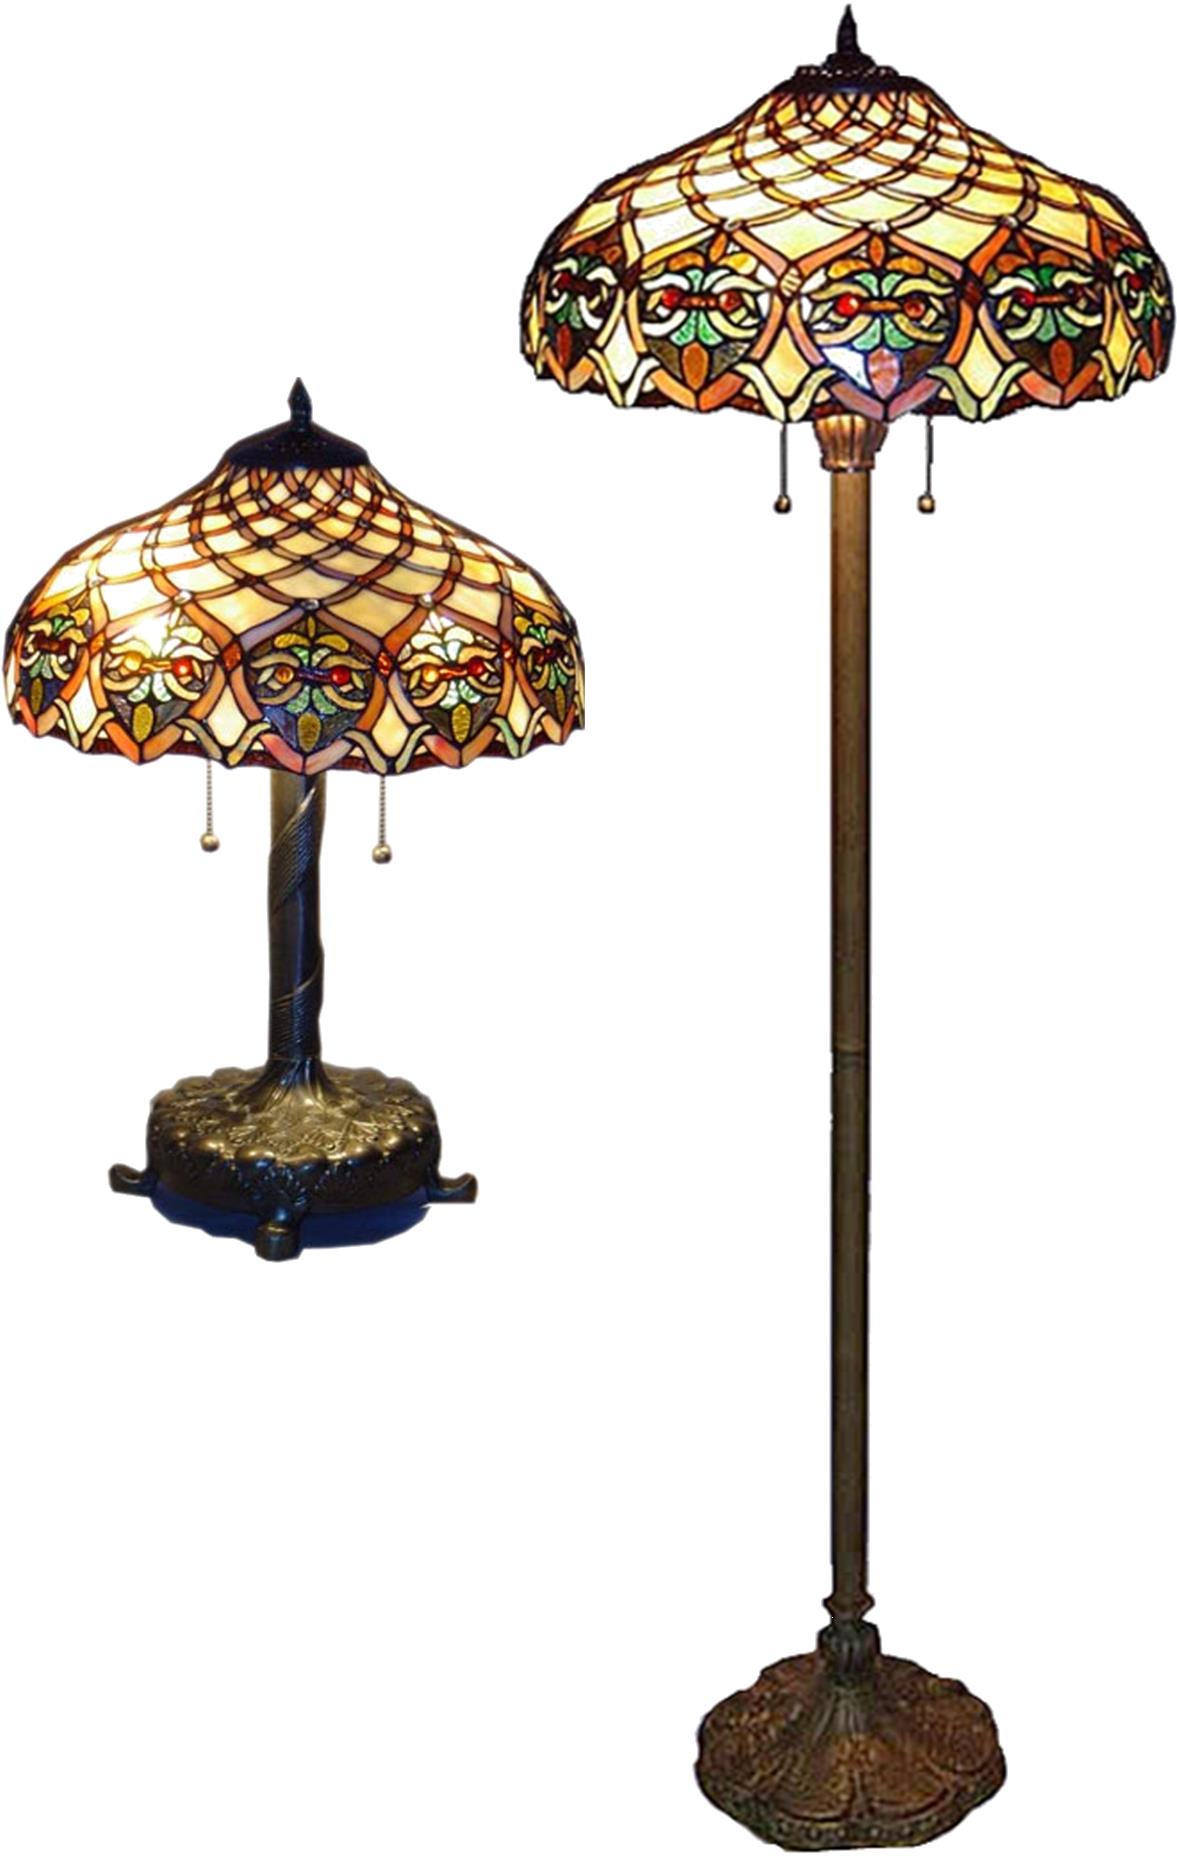 Victorian Tiffany Table or Floor Lamp - SOLD